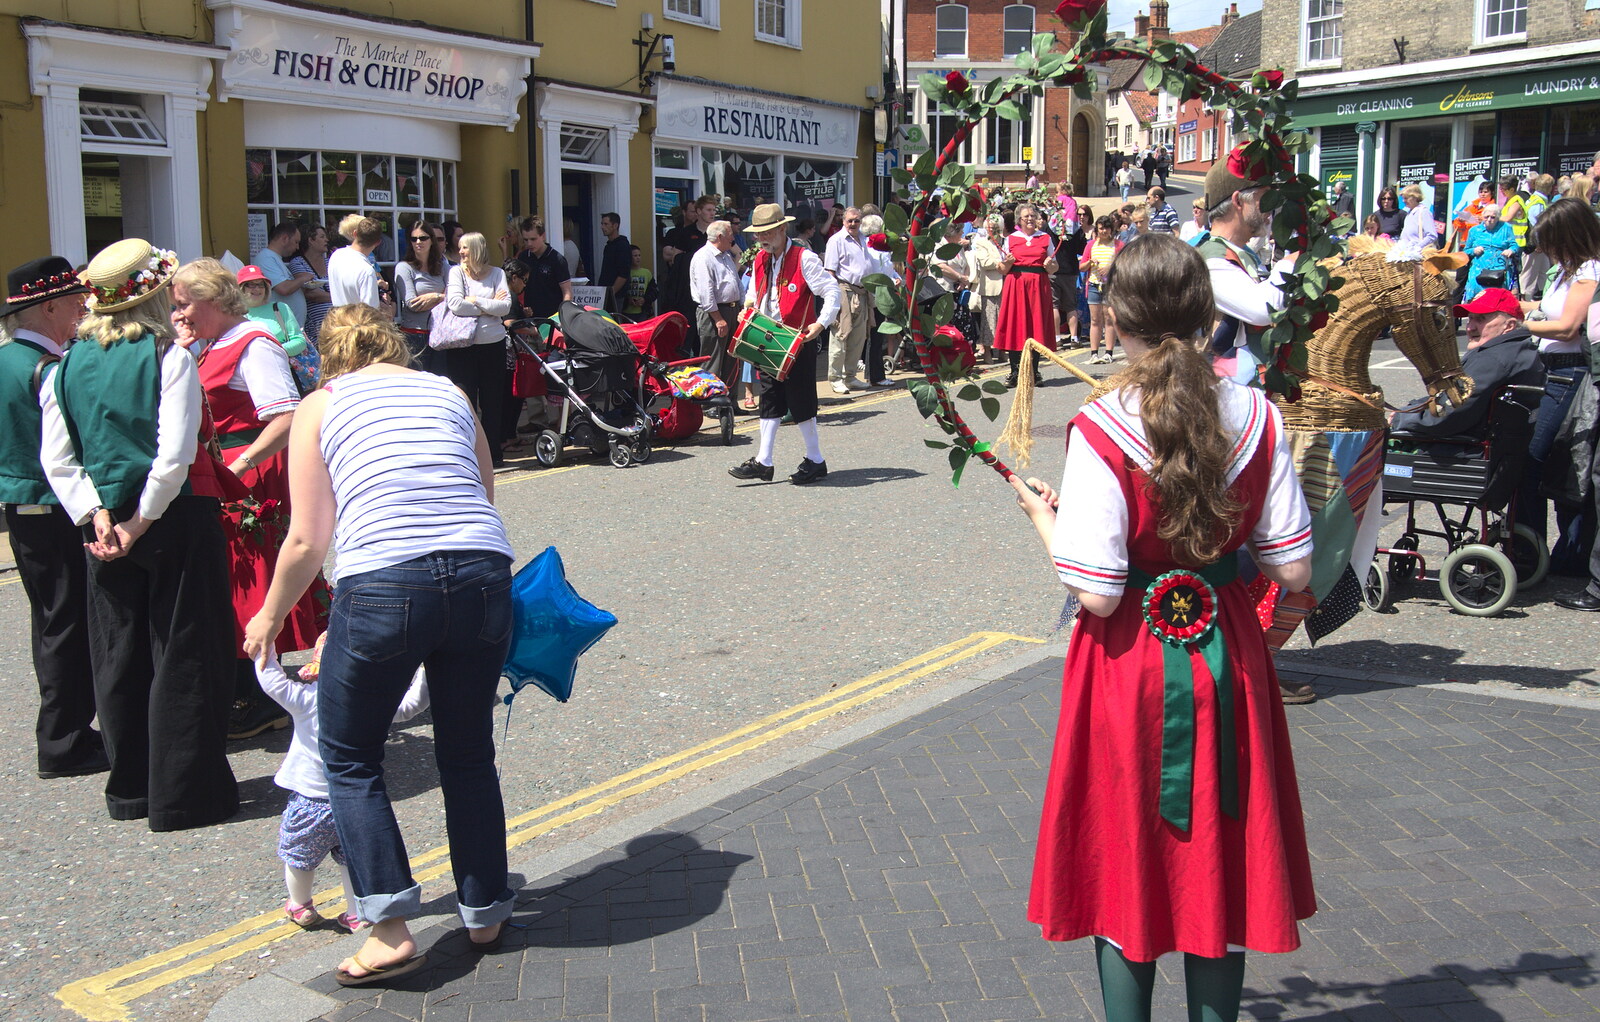 A girl waits with a hoop from Morris Dancing and a Carnival Procession, Diss, Norfolk - 17th June 2012